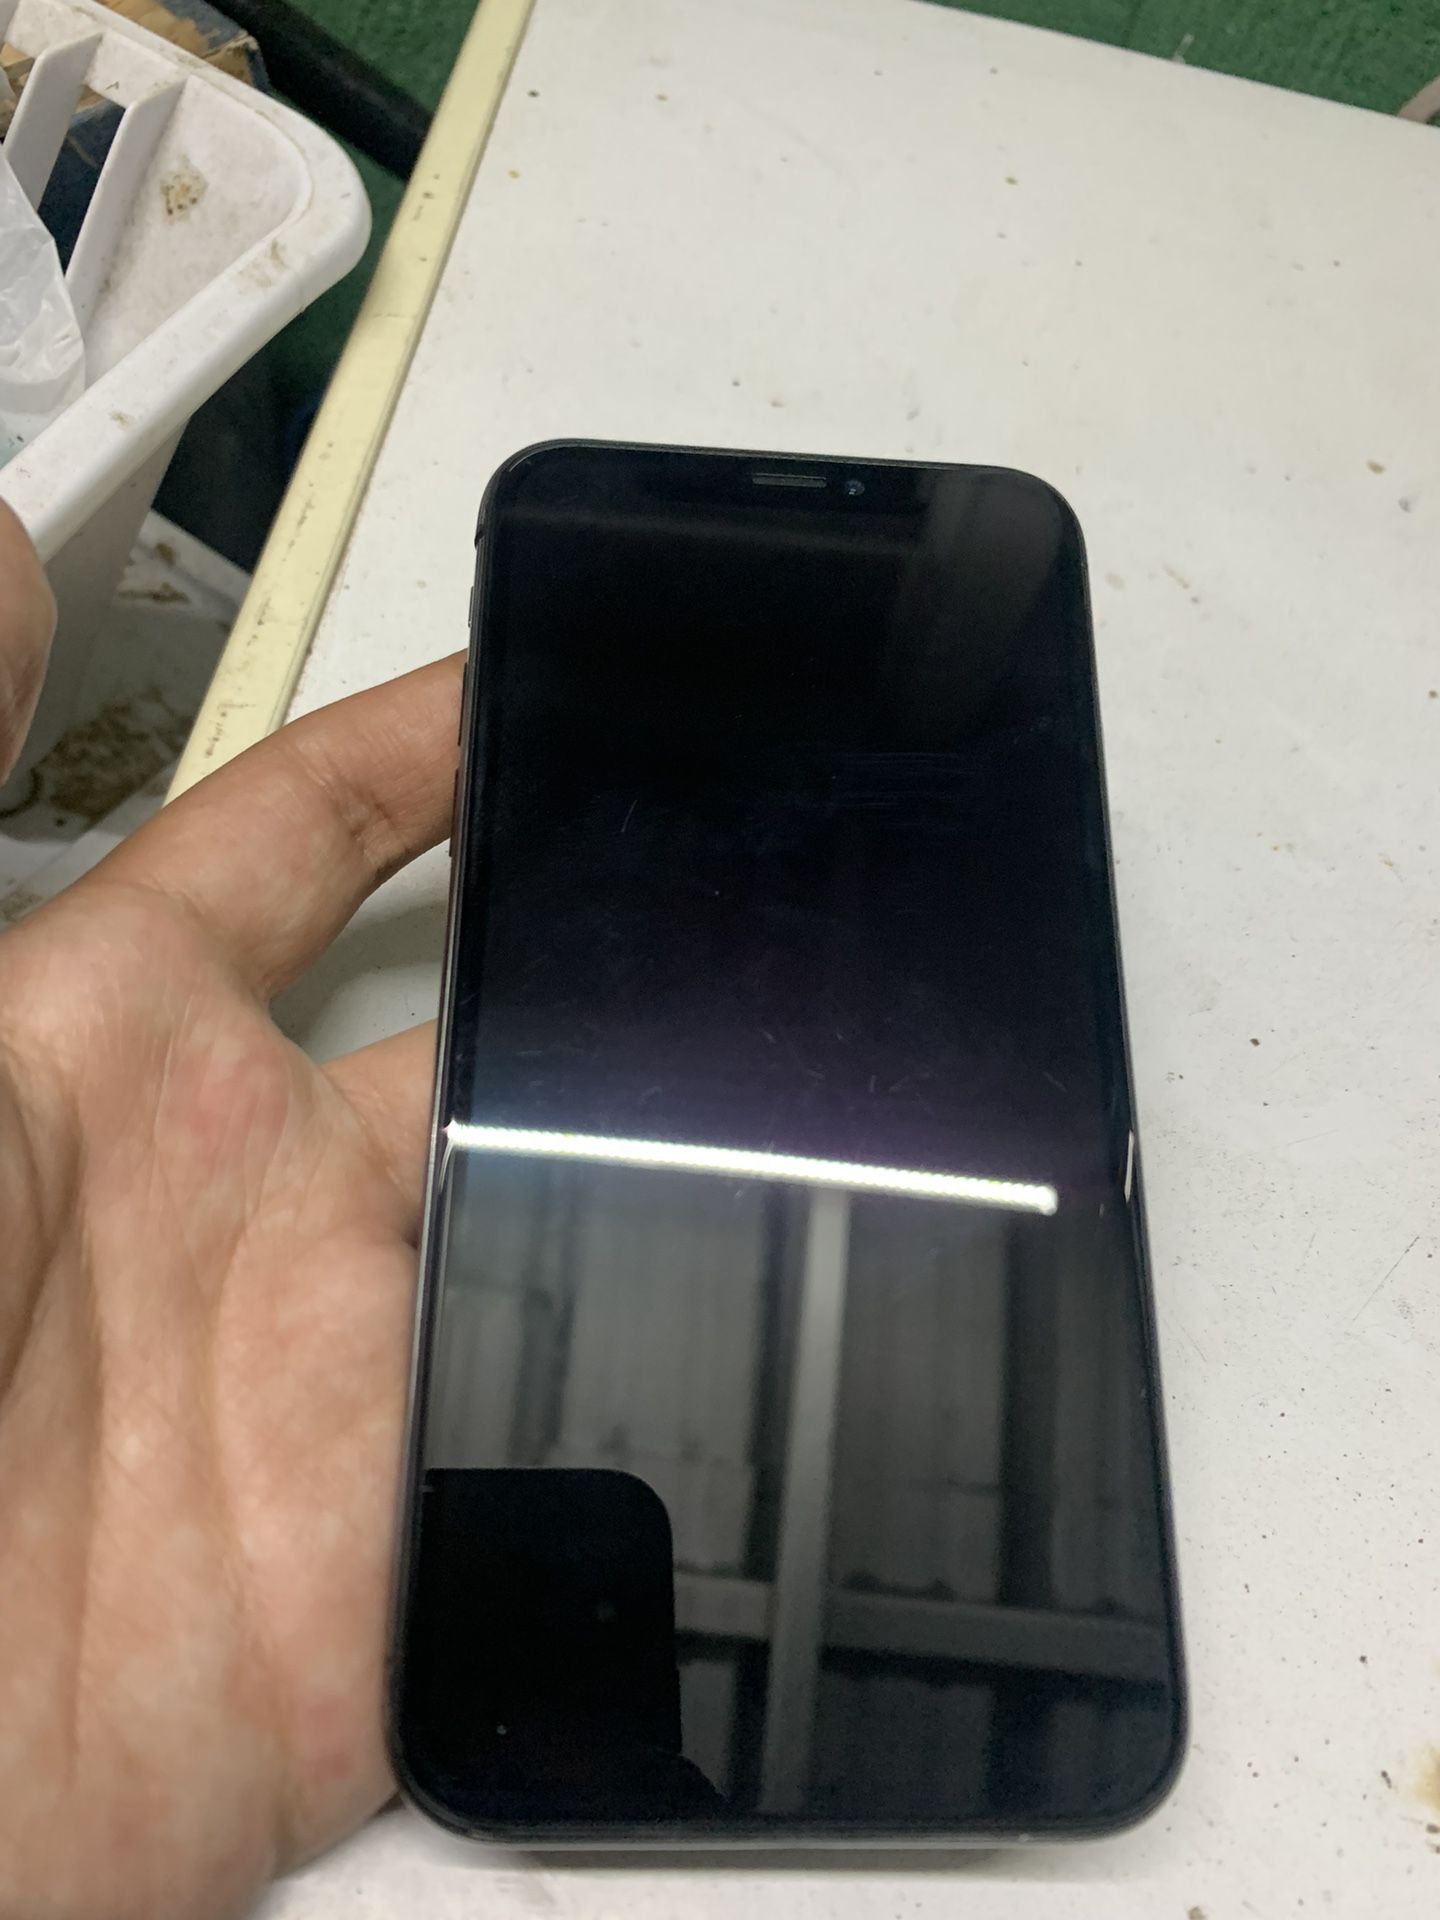 iPhone X used and Back Screen Cracked Works Perferctly Fine But Its Locked 